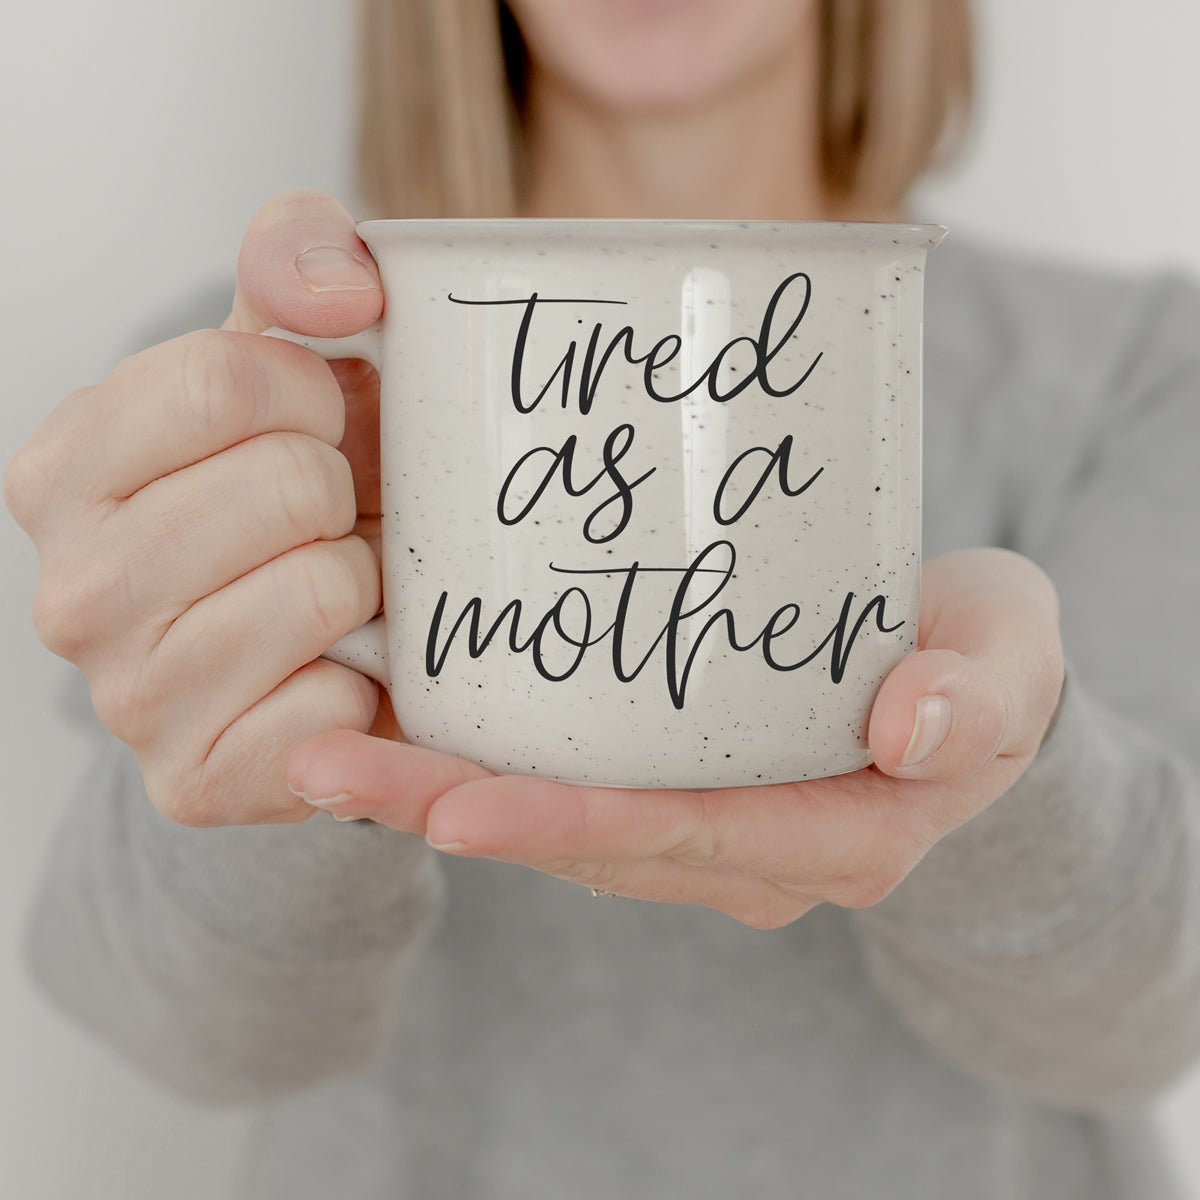 Tired as a Mother Quote Gifts for Her from Husband or from kids